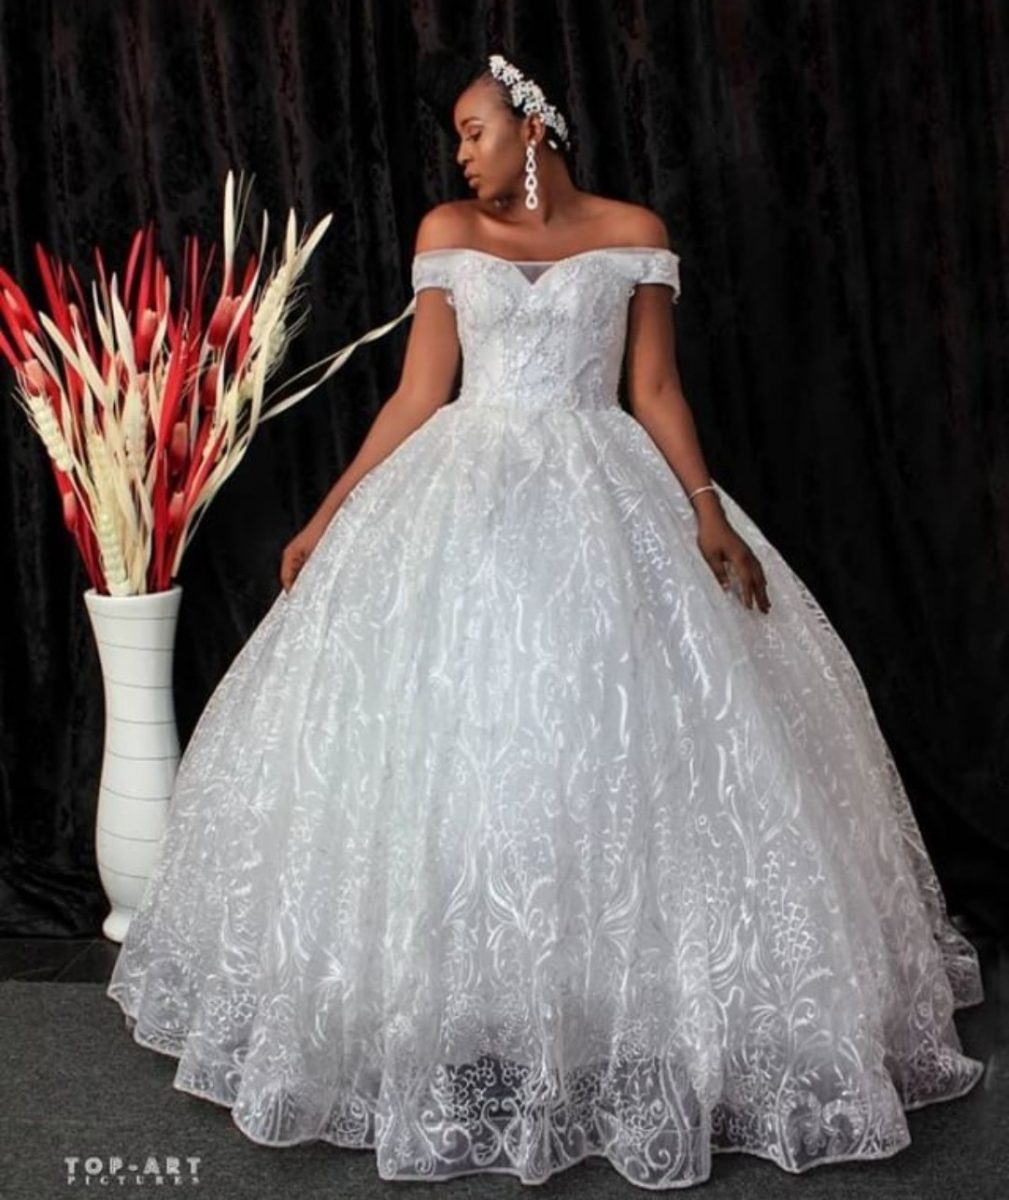  Wedding Gowns Styles 